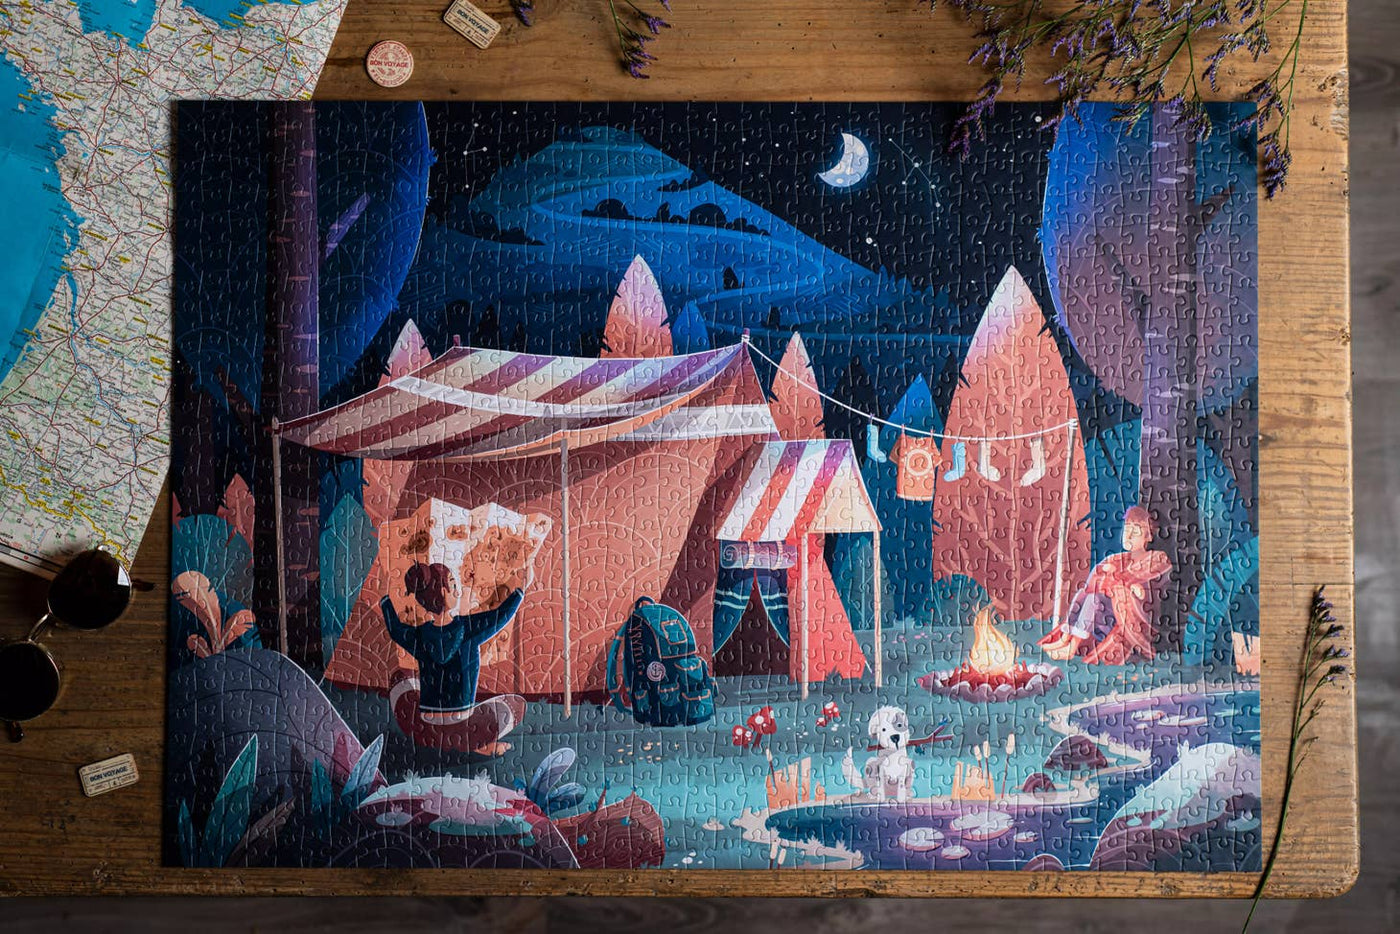 Camping Under The Stars | 1,000 Piece Jigsaw Puzzle